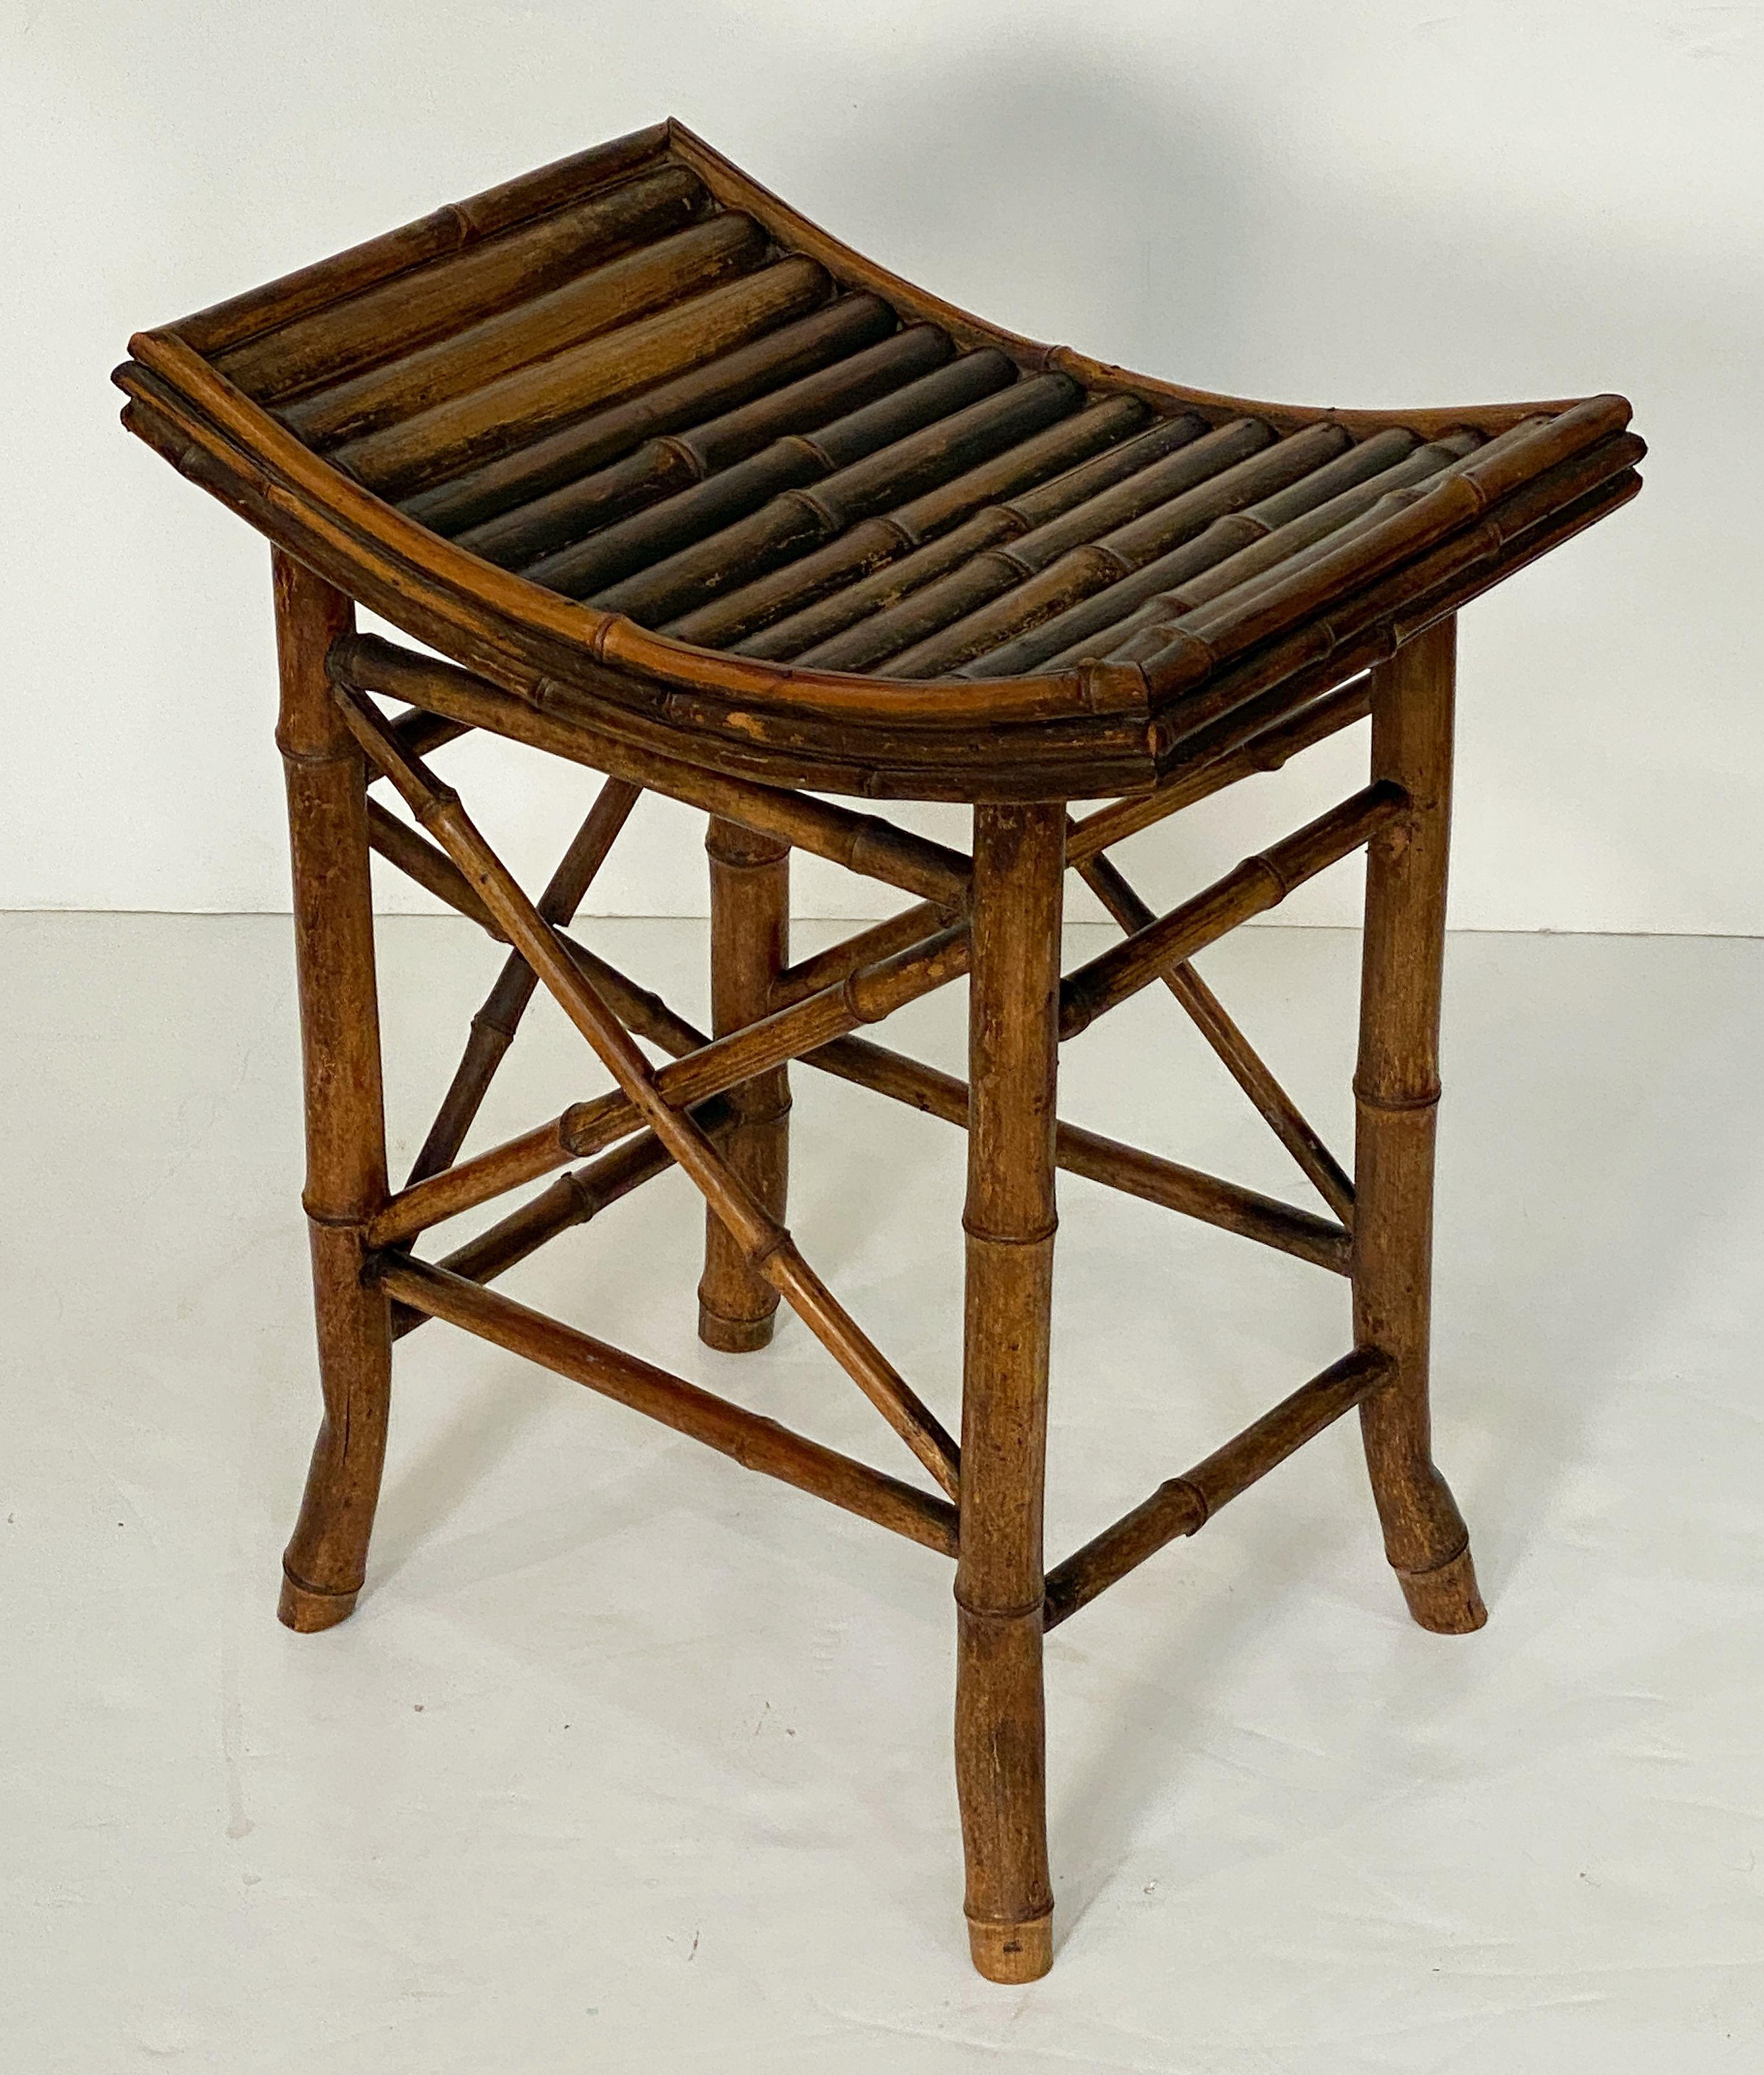 A fine English bamboo bench or stool from the Aesthetic Movement period of the late 19th century, featuring a handsome patinated finish and lovely curved rectangular saddle seat, upon a decorative four-legged stretcher base.